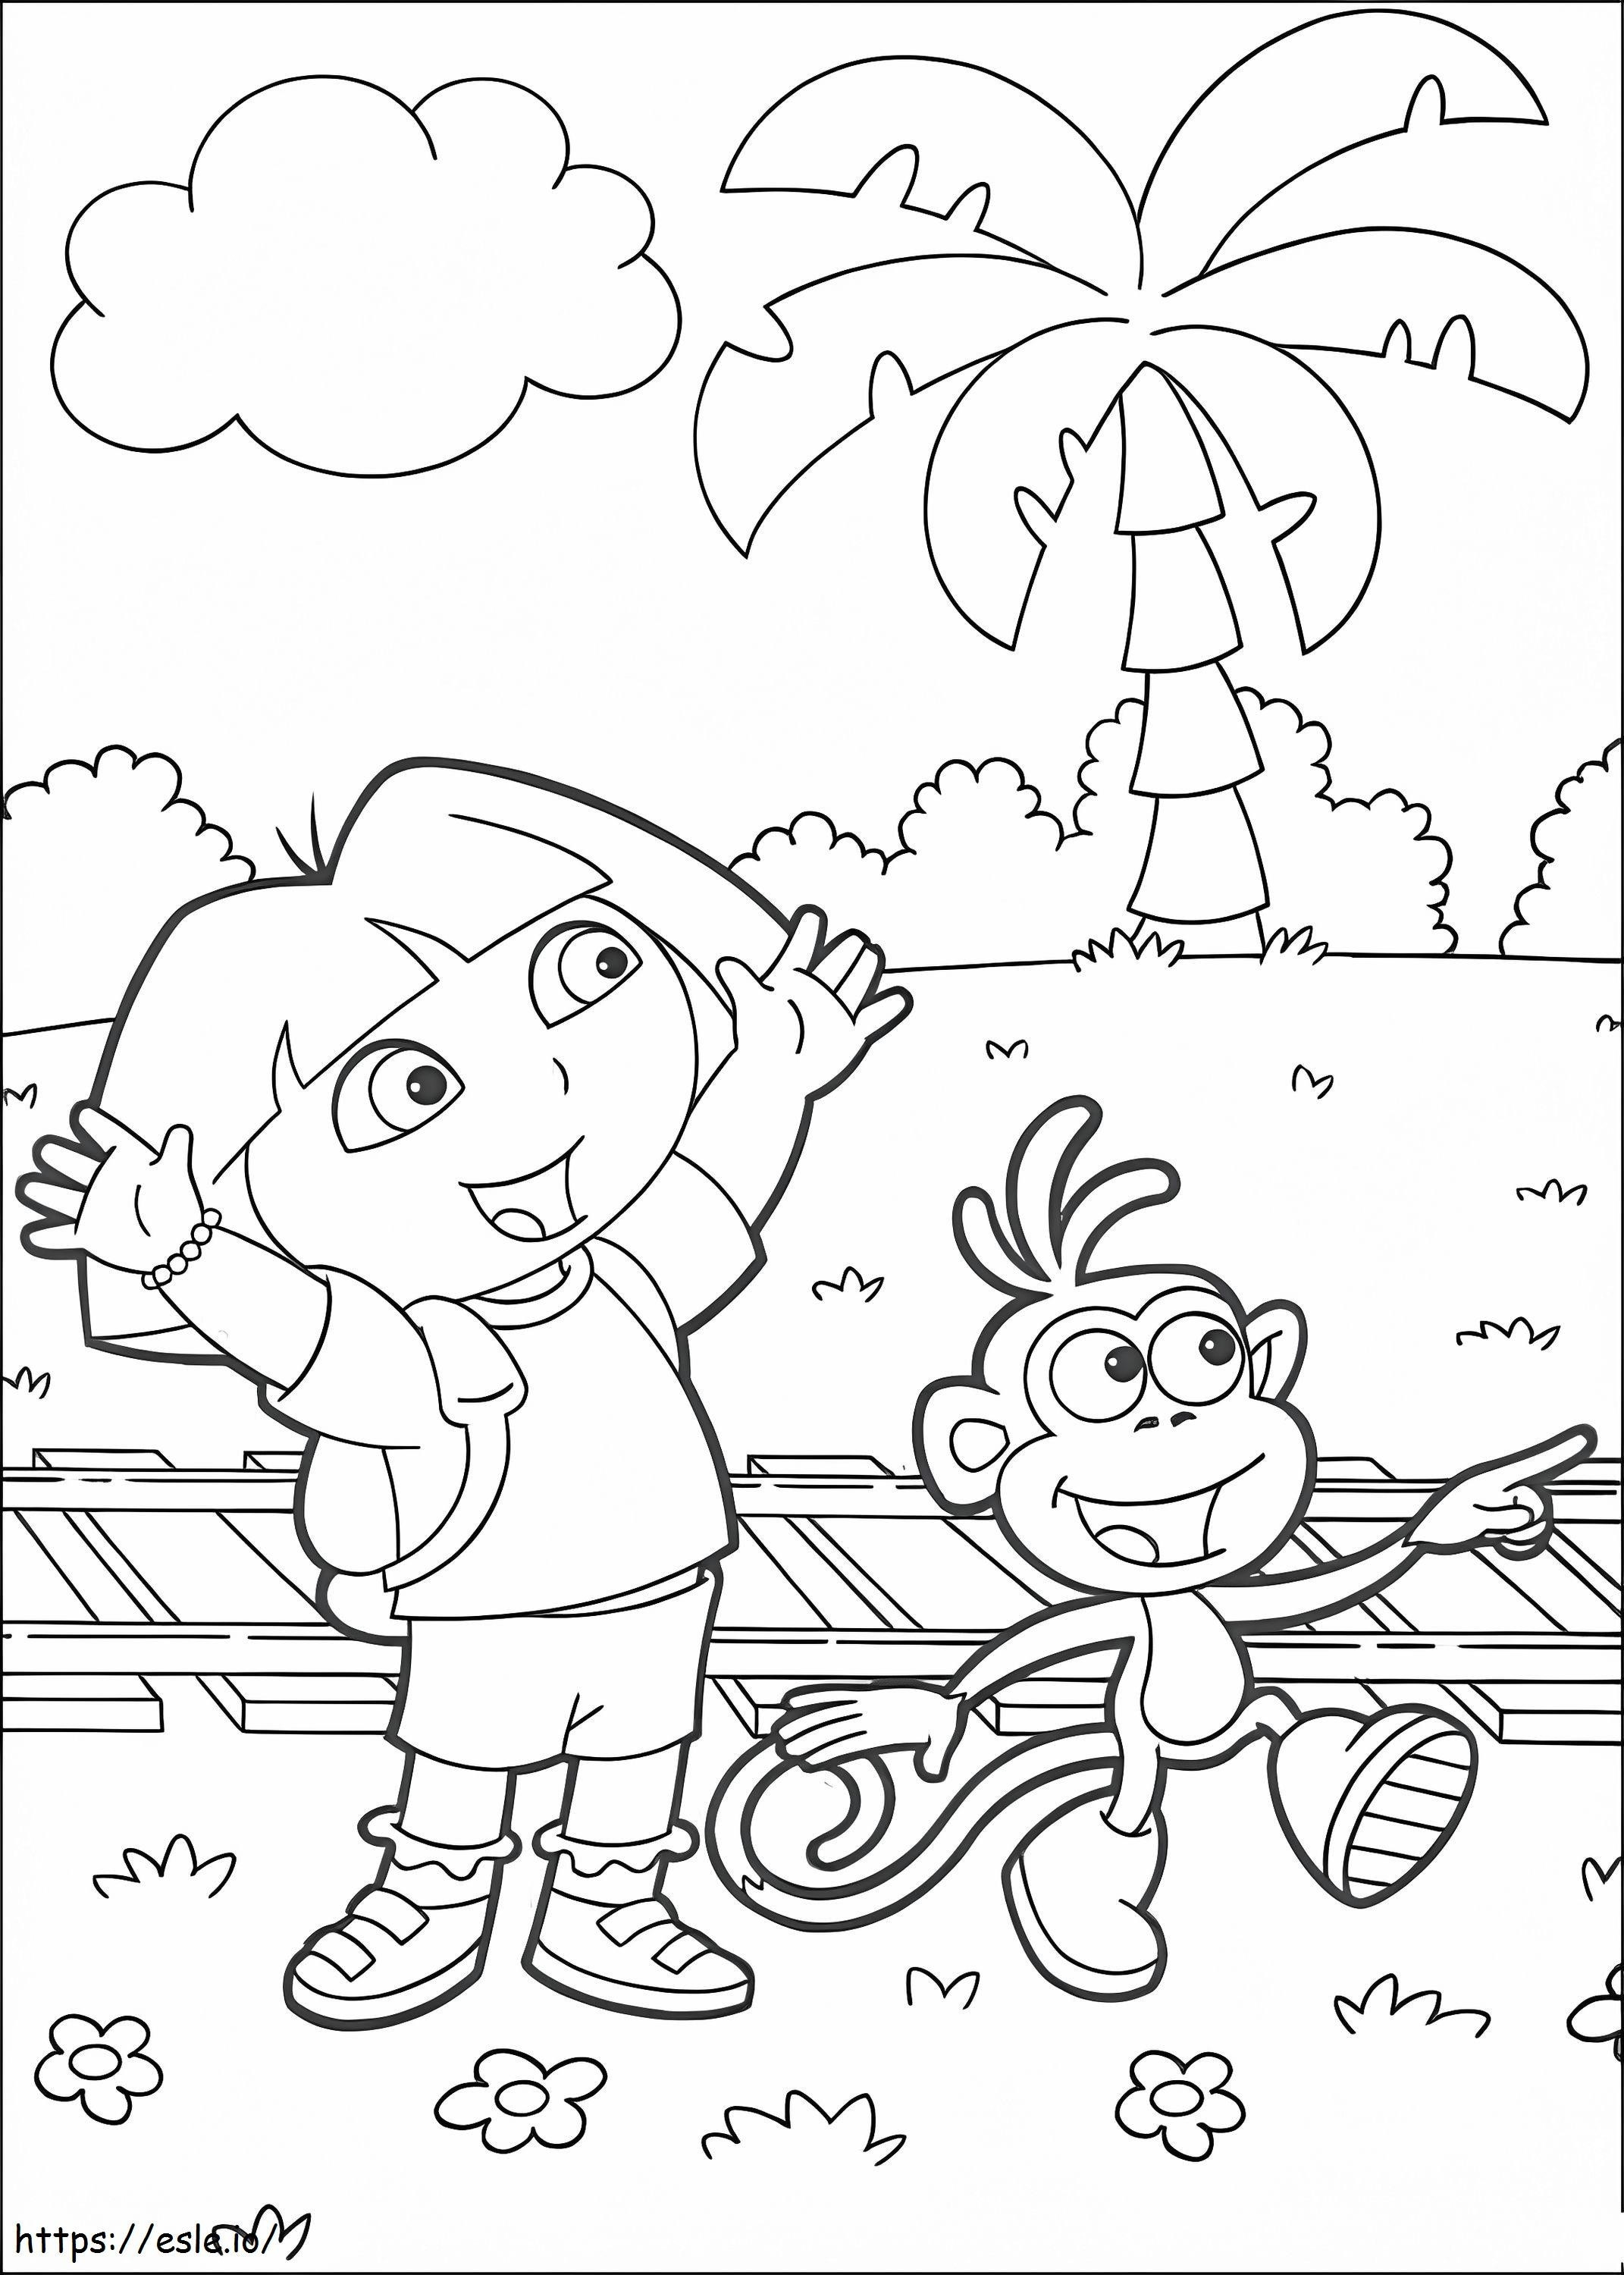 Dora Waiting For The Train coloring page